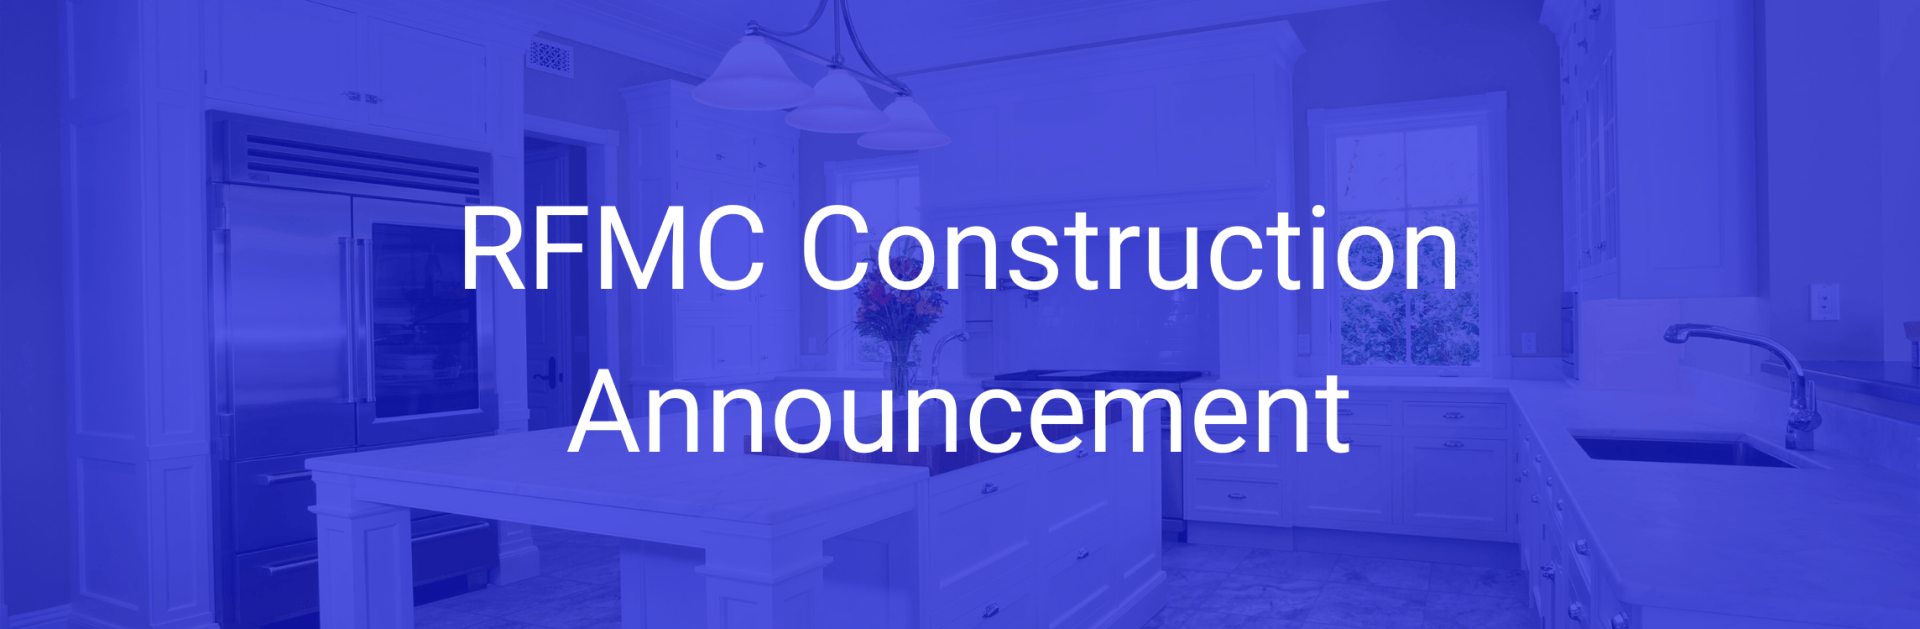 Kitchen Image  with Blue Overlay with Message RFMC Construction Announcement